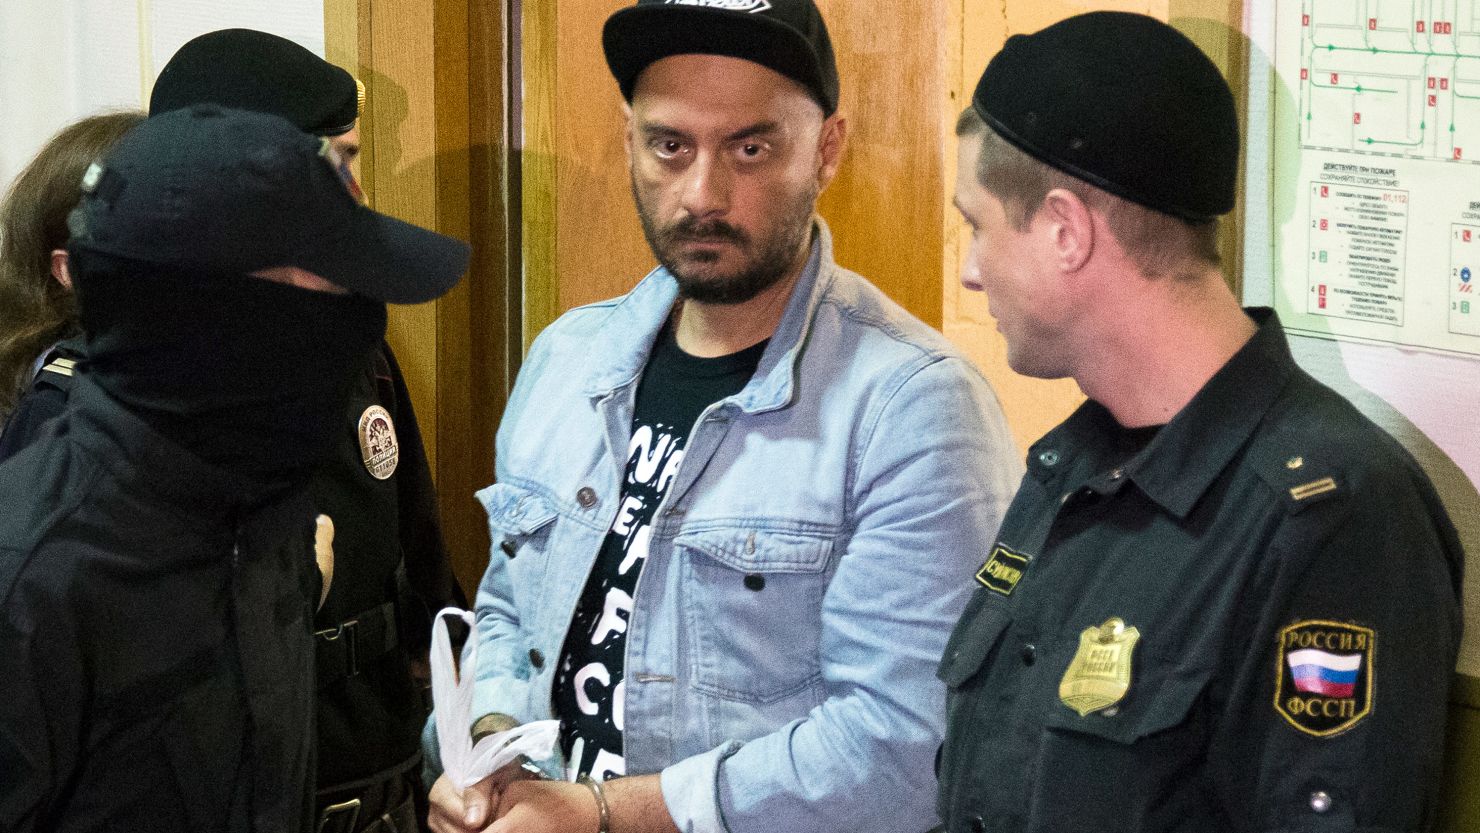 Russian theater and film director Kirill Serebrennikov is ushered into court for a hearing on August 23, 2017, in Moscow.